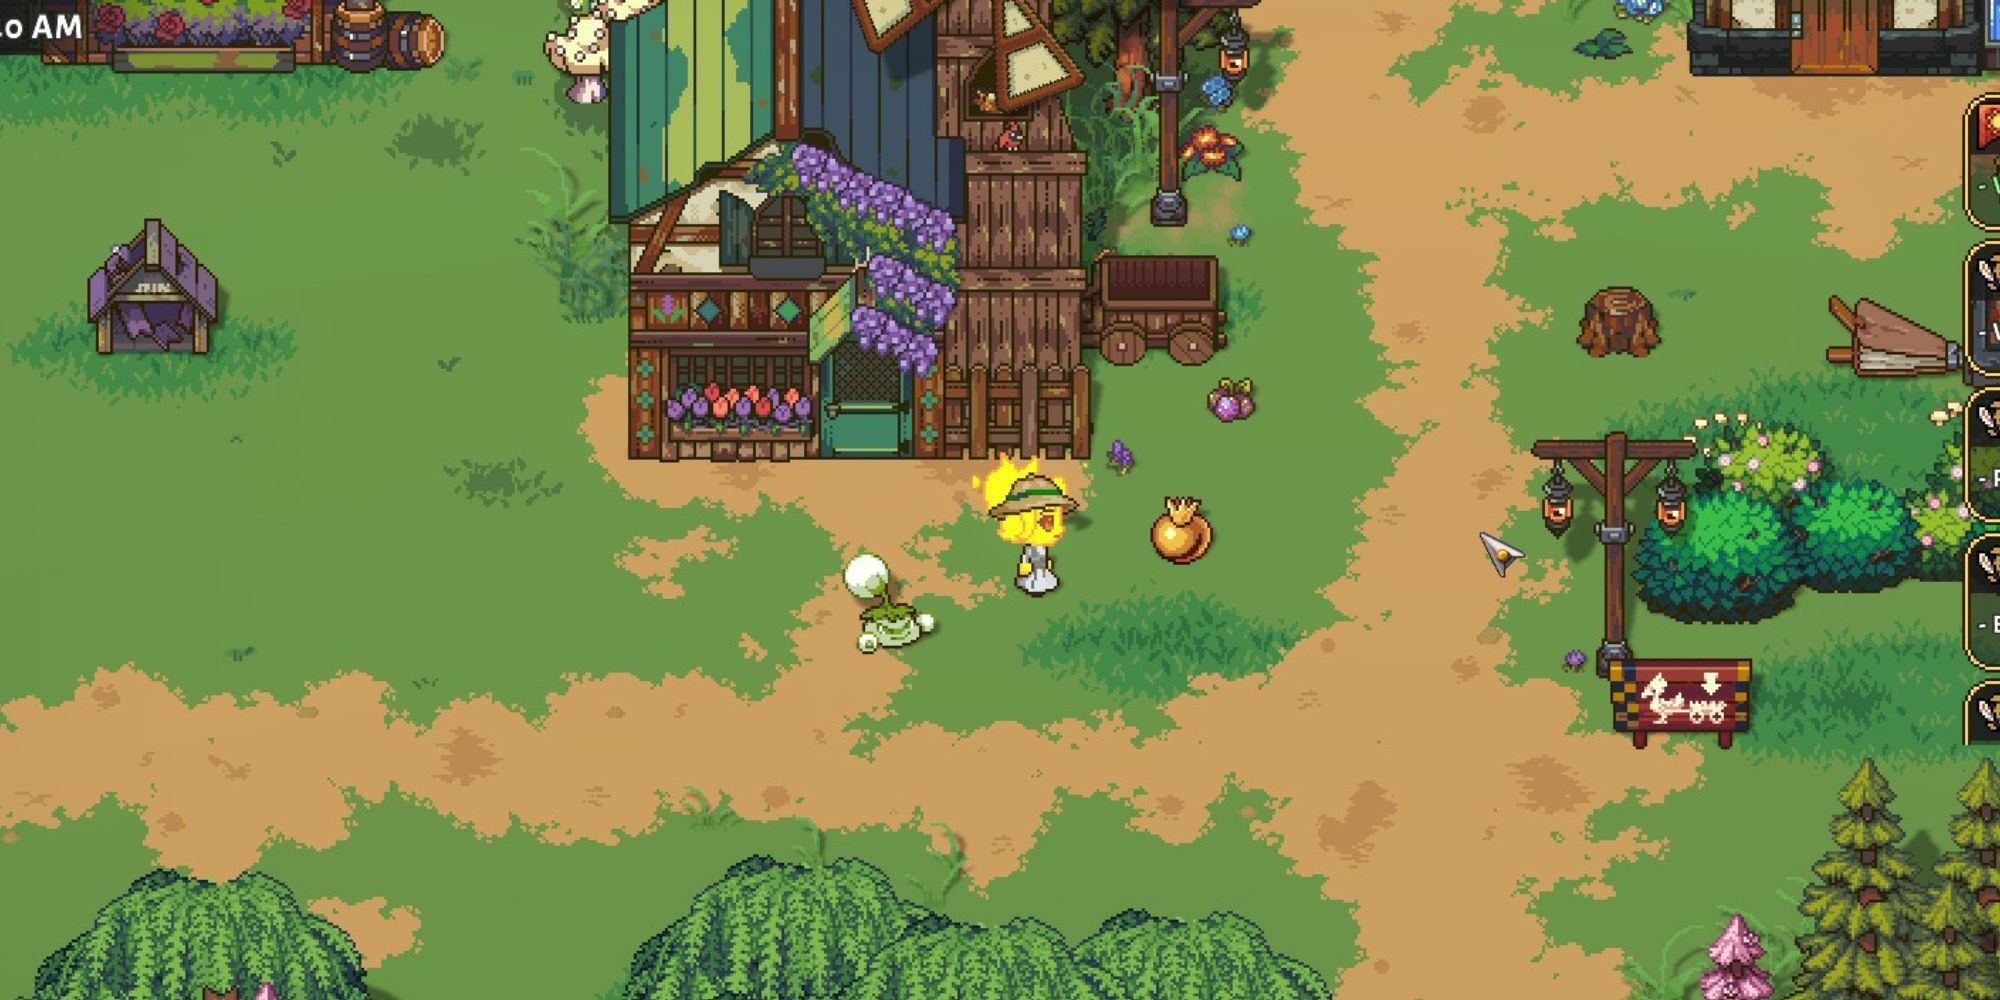 Weedy follows the farmer as they approach a golden pomegranate outside of Kara's home